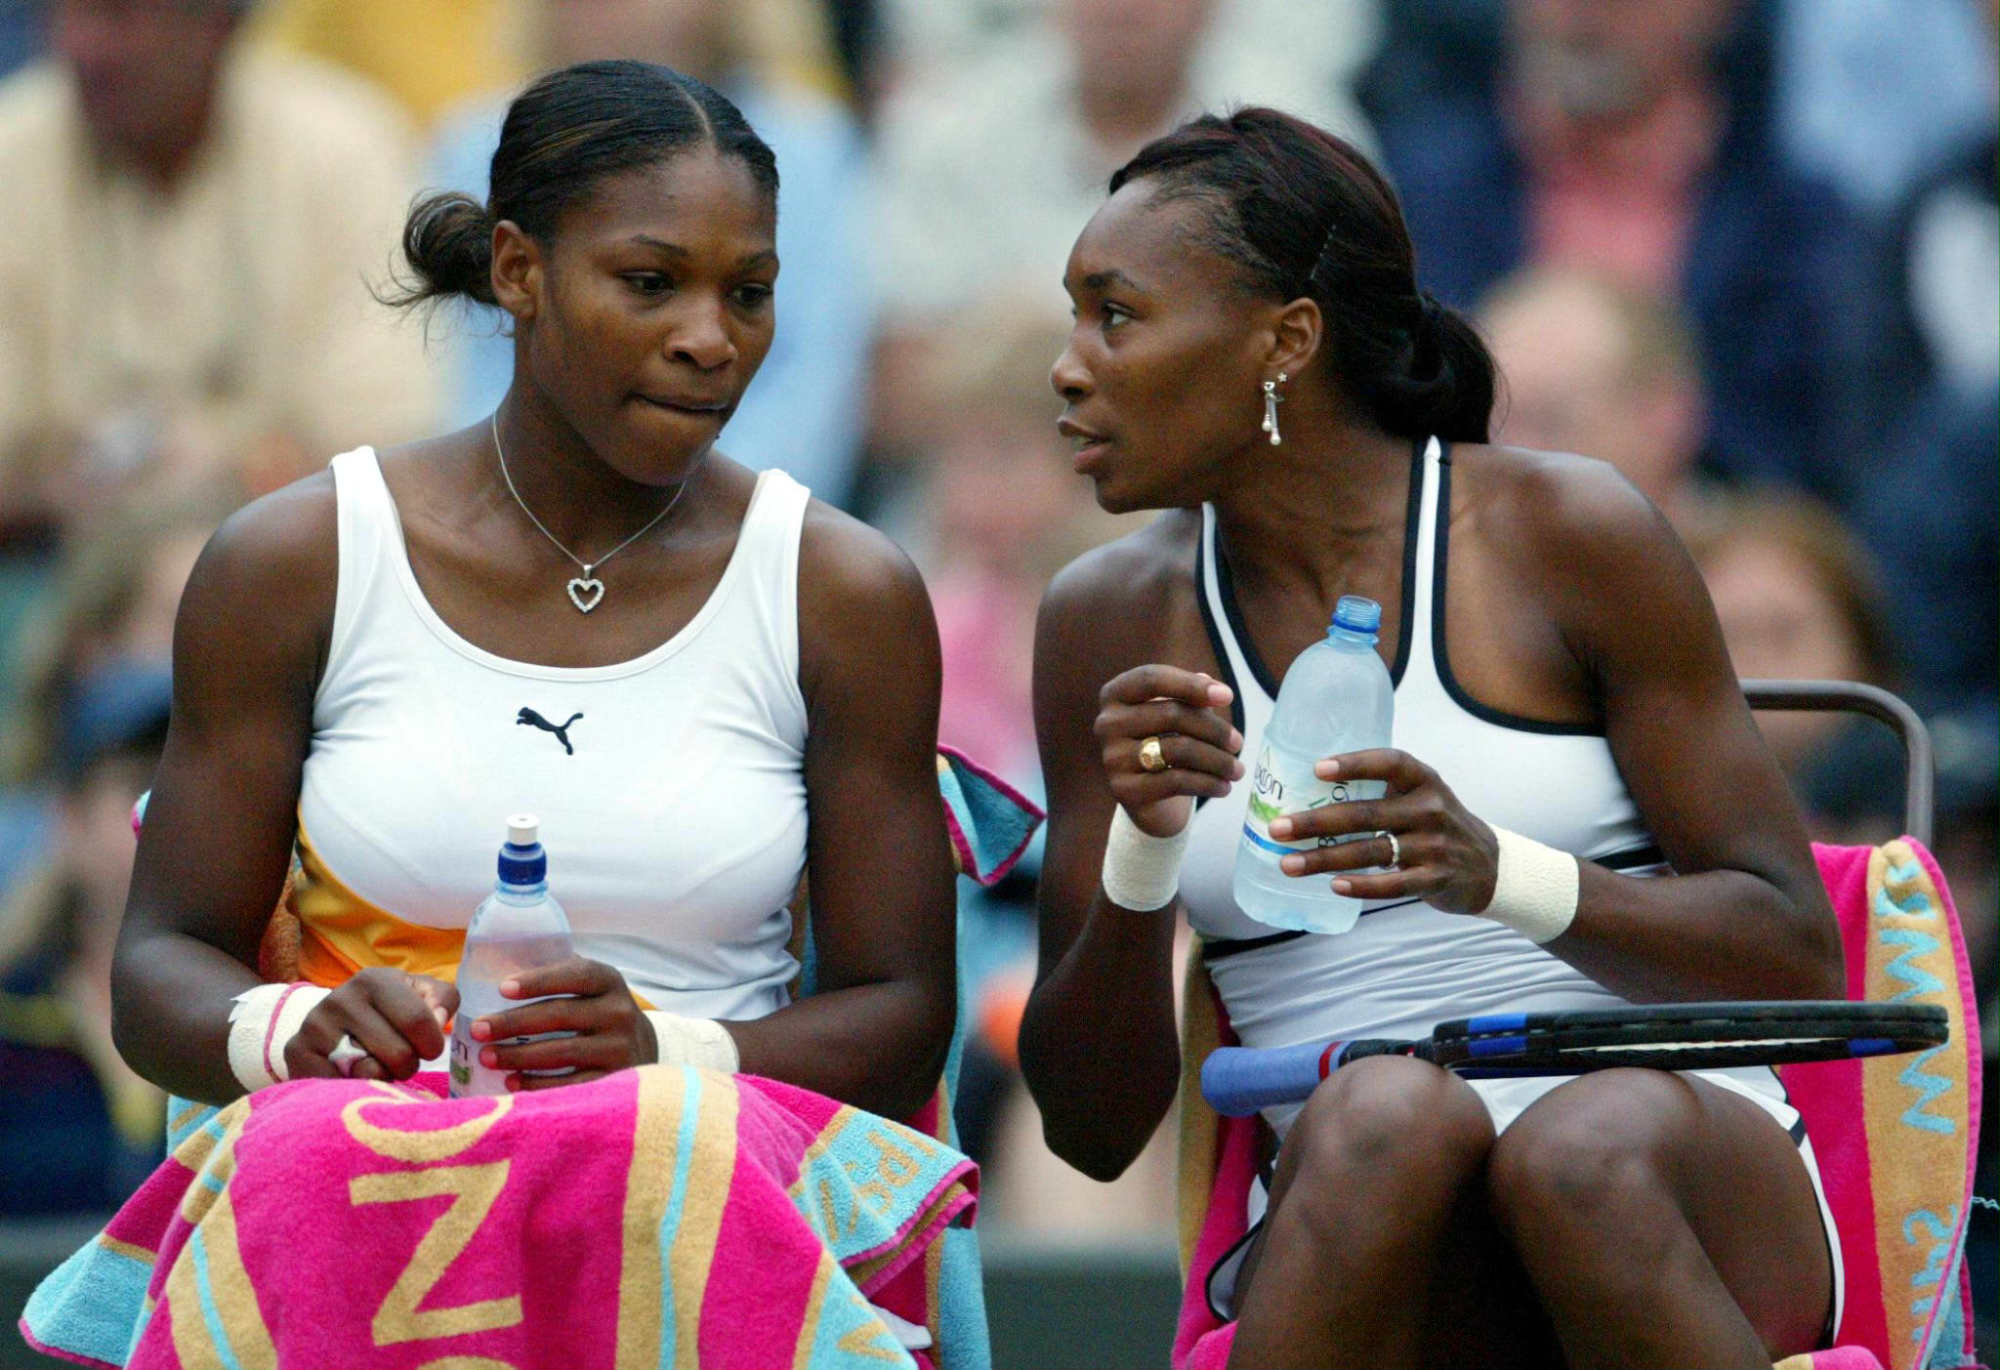 Serena and Venus' sister calls dad a 'sperm donor' who abandoned